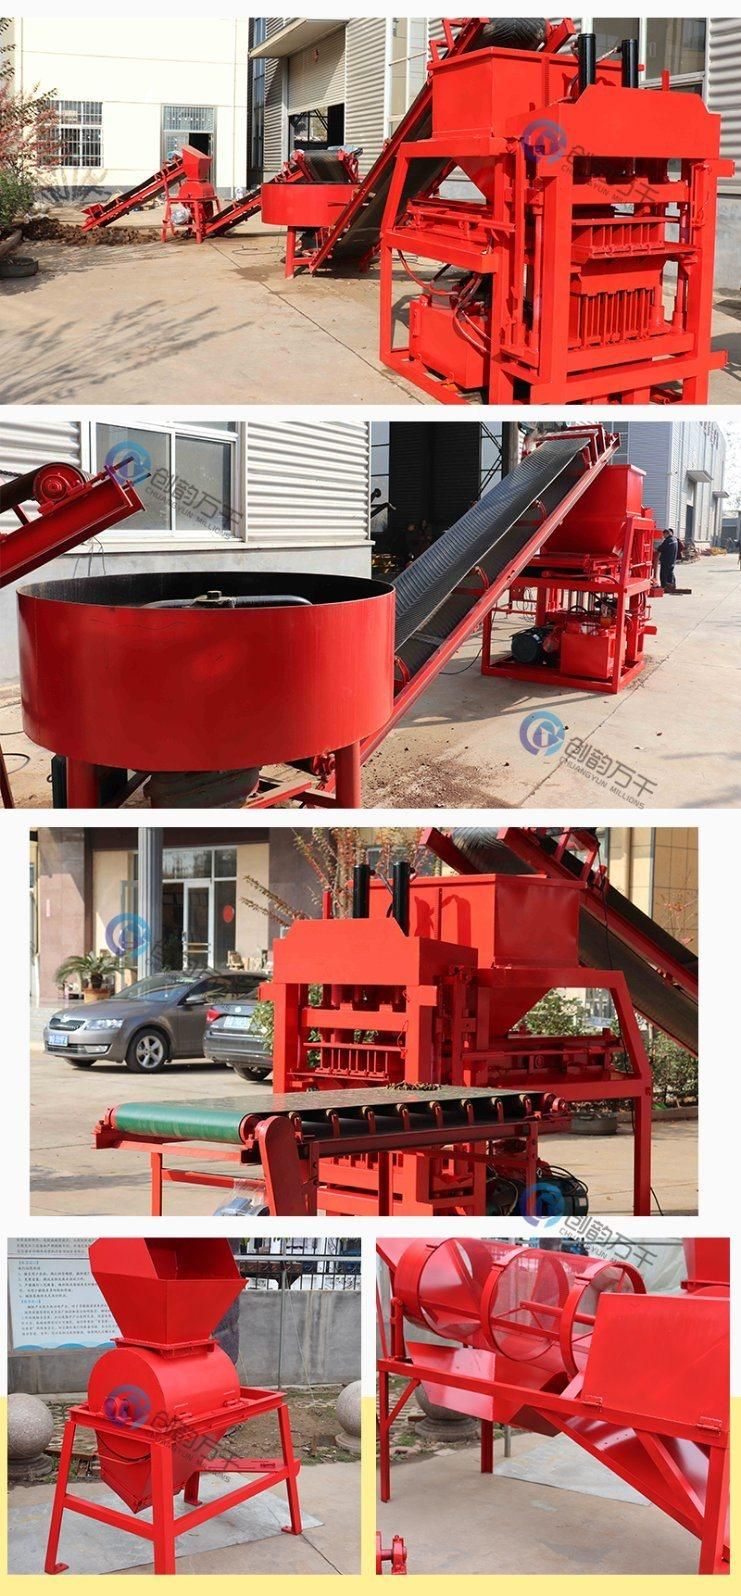 Cy5-10 Clay Soil Lego Interlocking Brick Making Machine with Quality Certificate